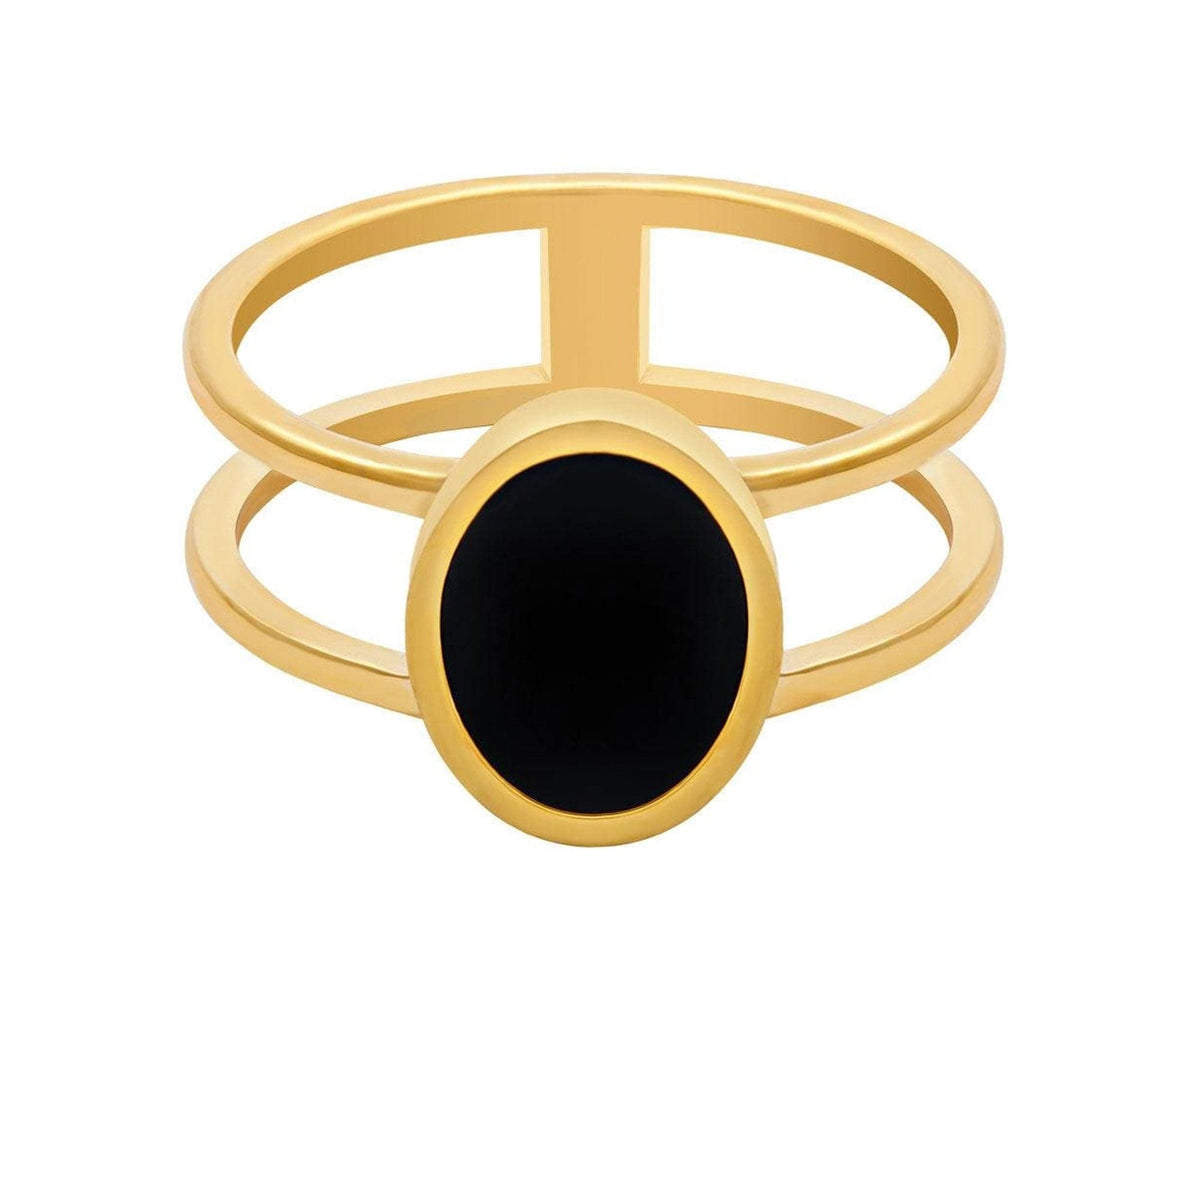 BohoMoon Stainless Steel Oblivion Ring Gold / US 6 / UK L / EUR 51 (small)